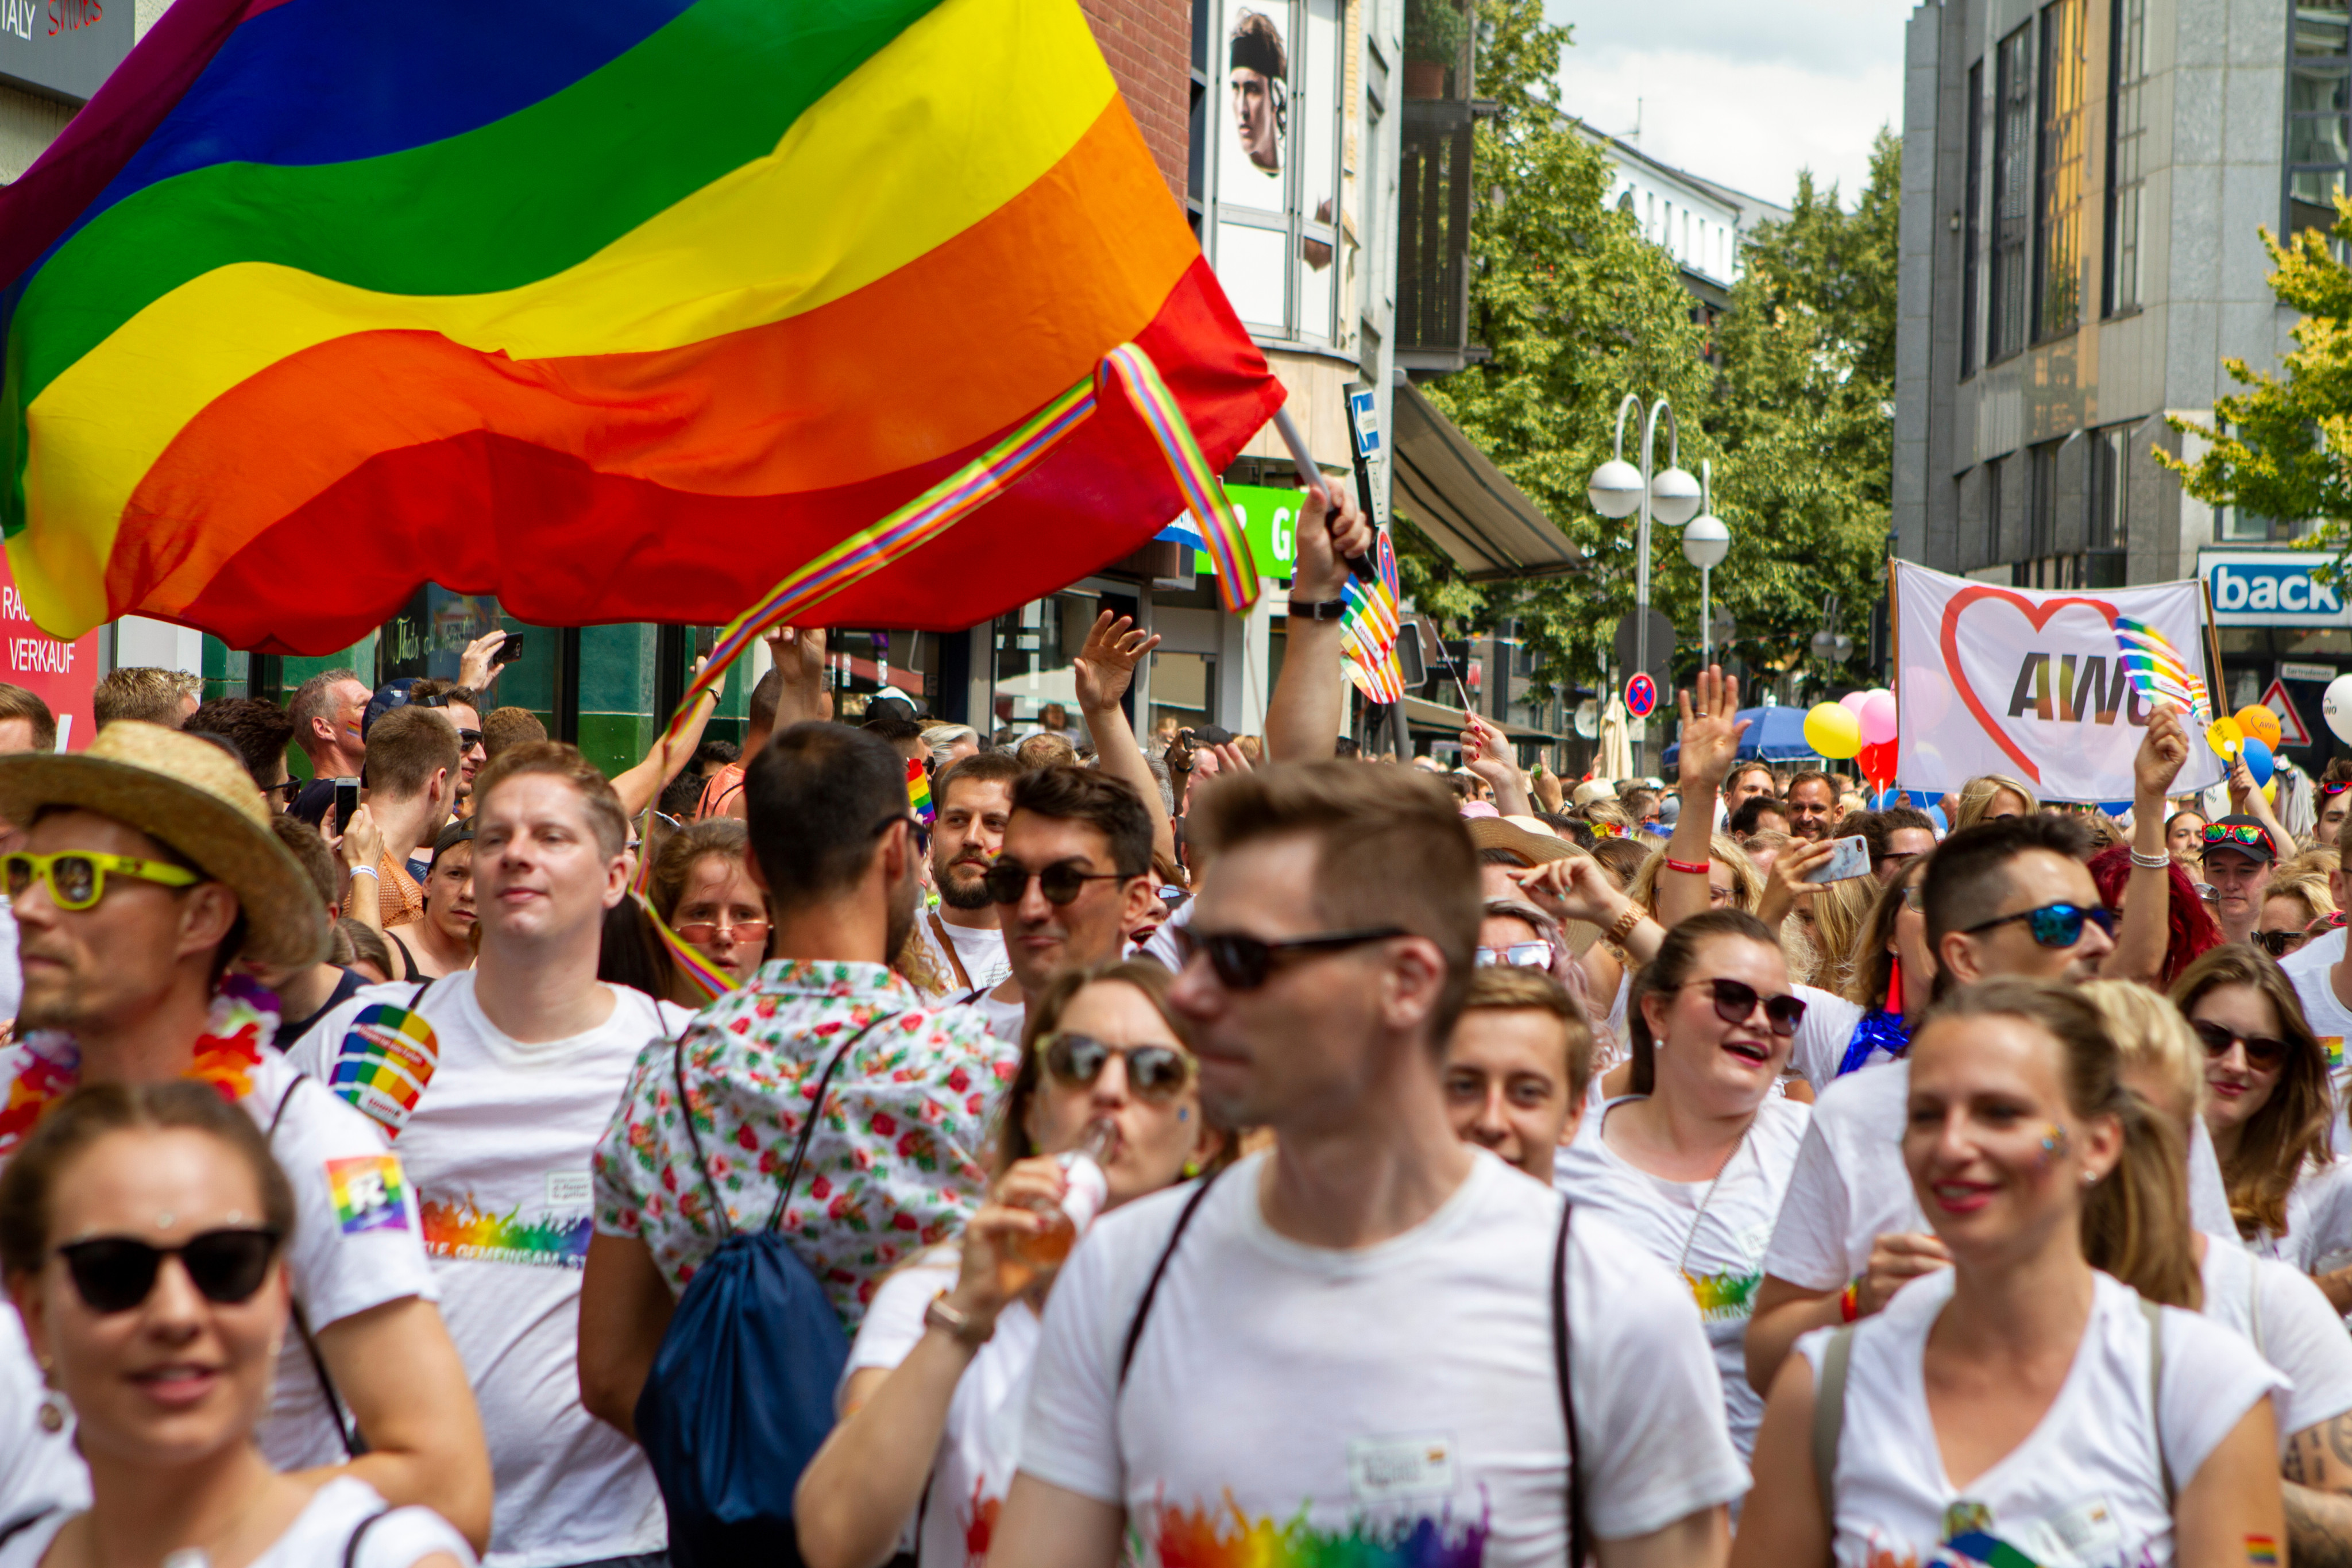 A Pride parade in Berlin, Germany. File photo: Shutterstock